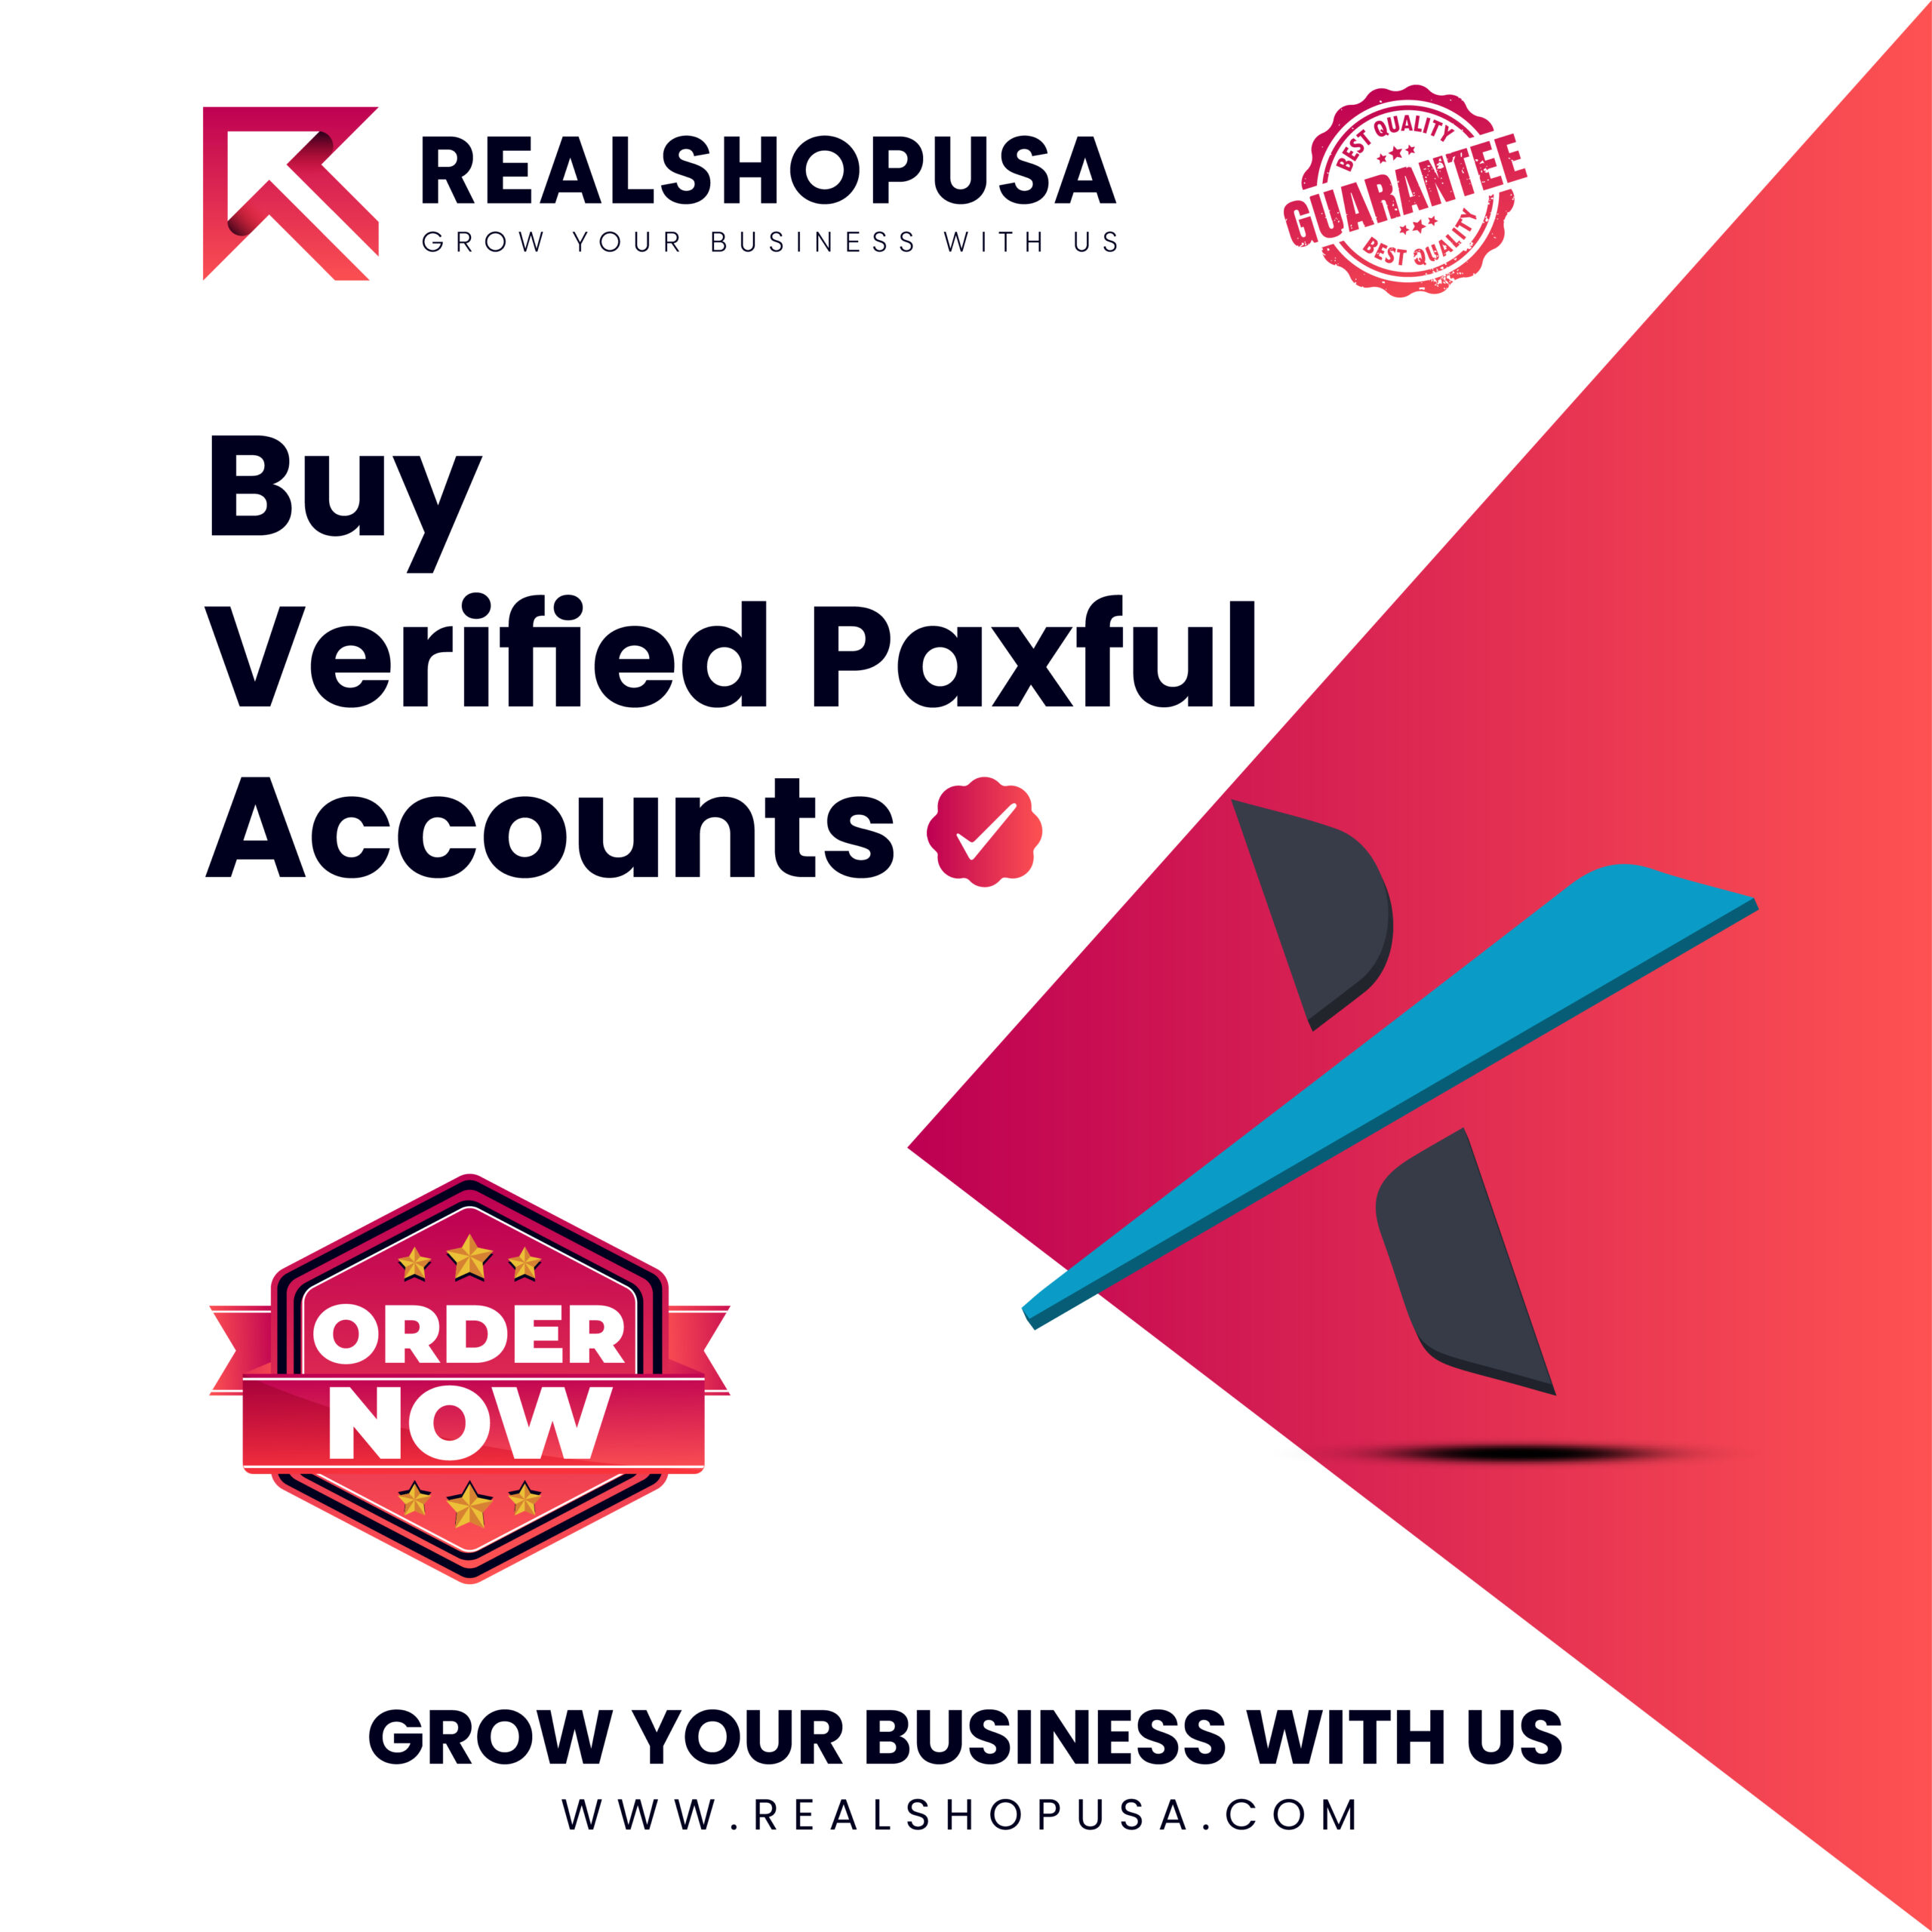 Buy Verified Paxful Accounts - 100% Verified & Active Accounts...